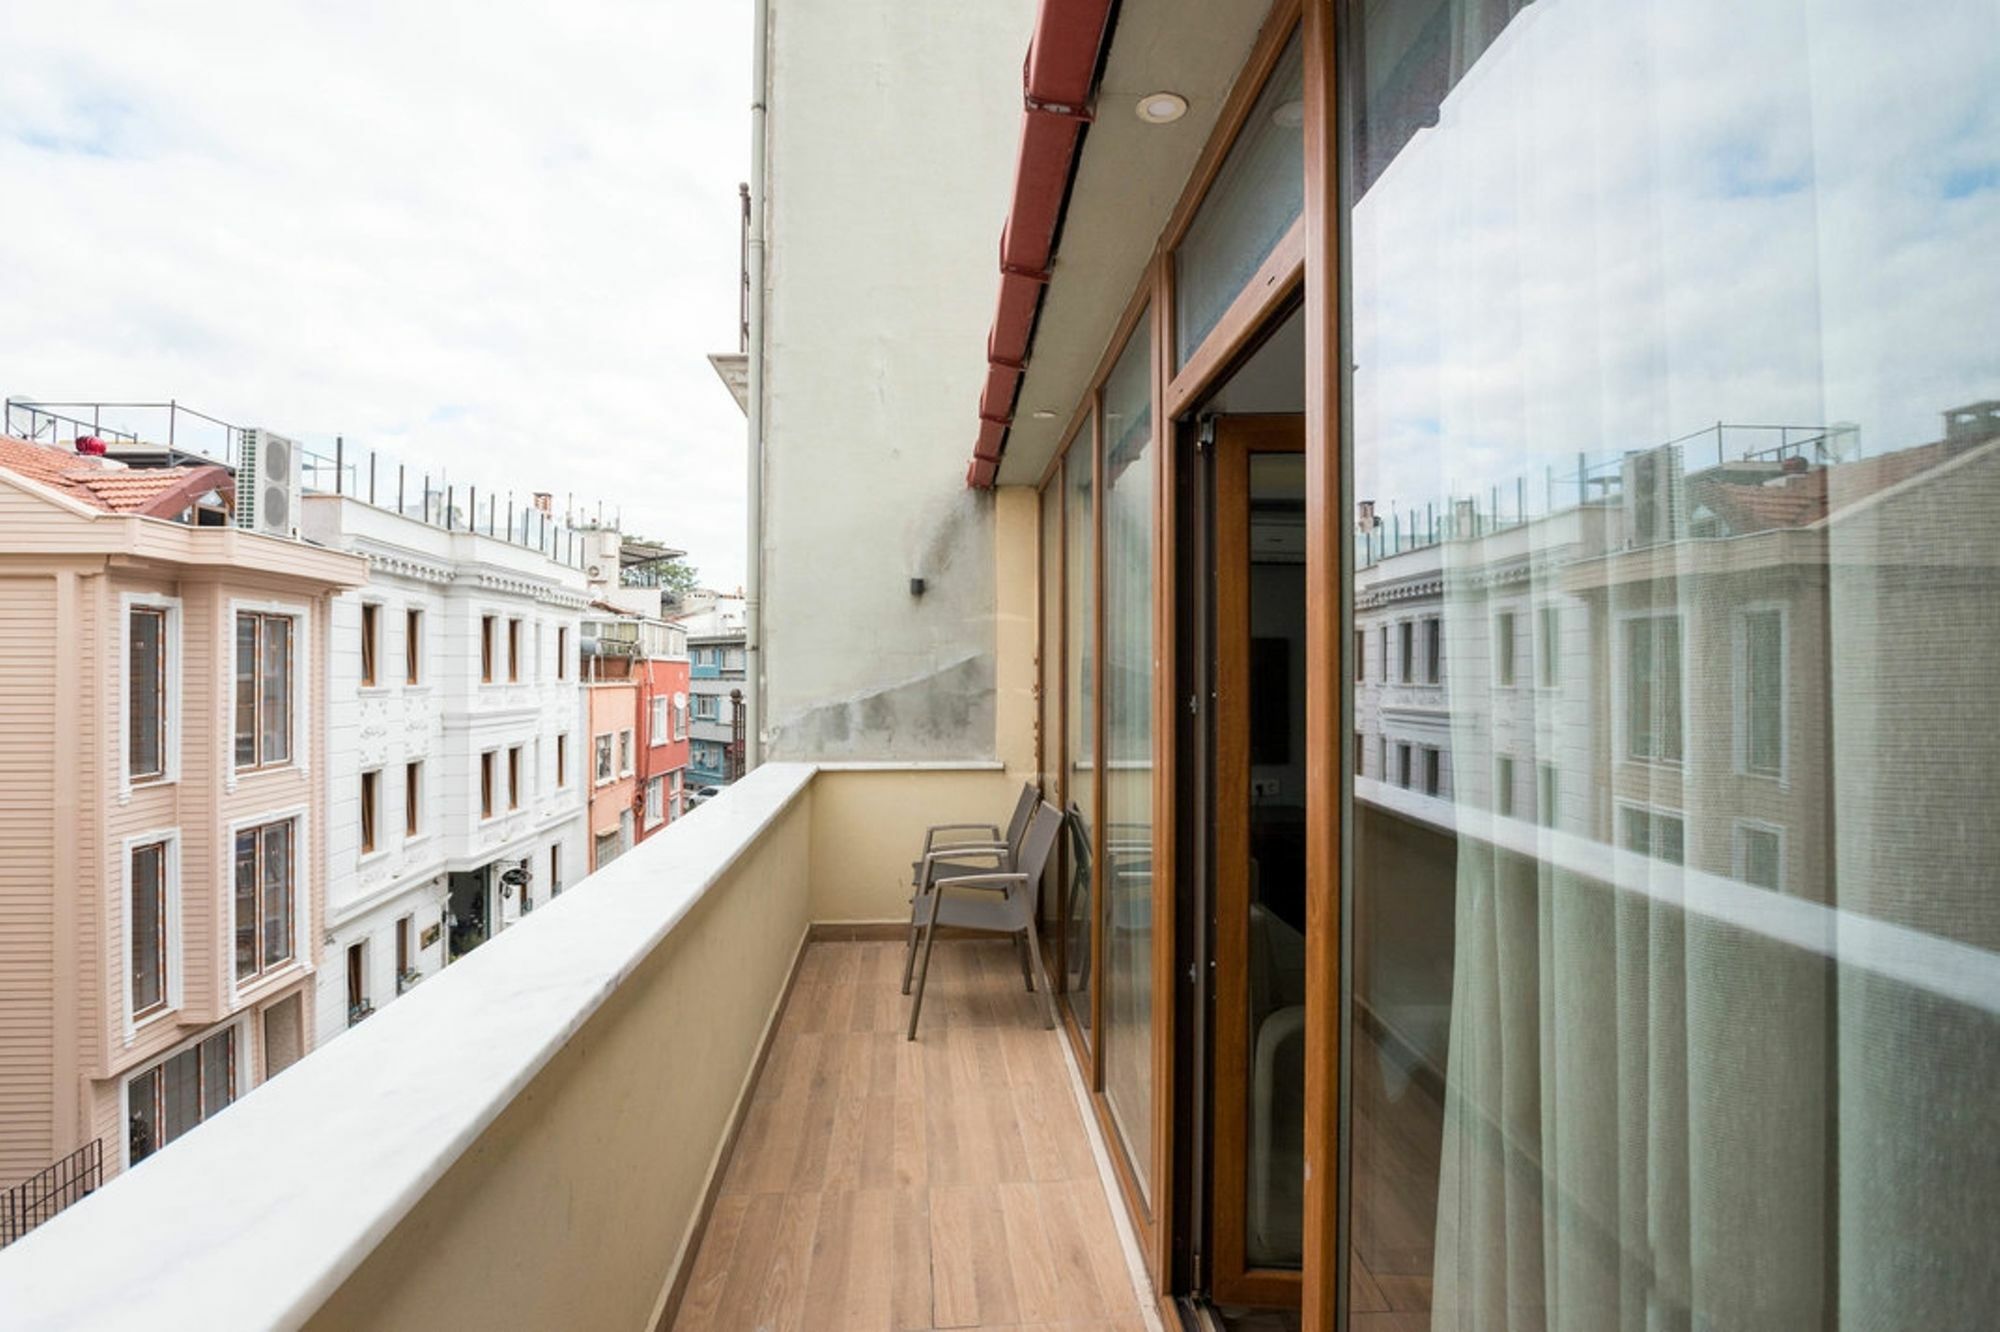 Bucoleon By Cheers Hostel Istanbul Exterior photo